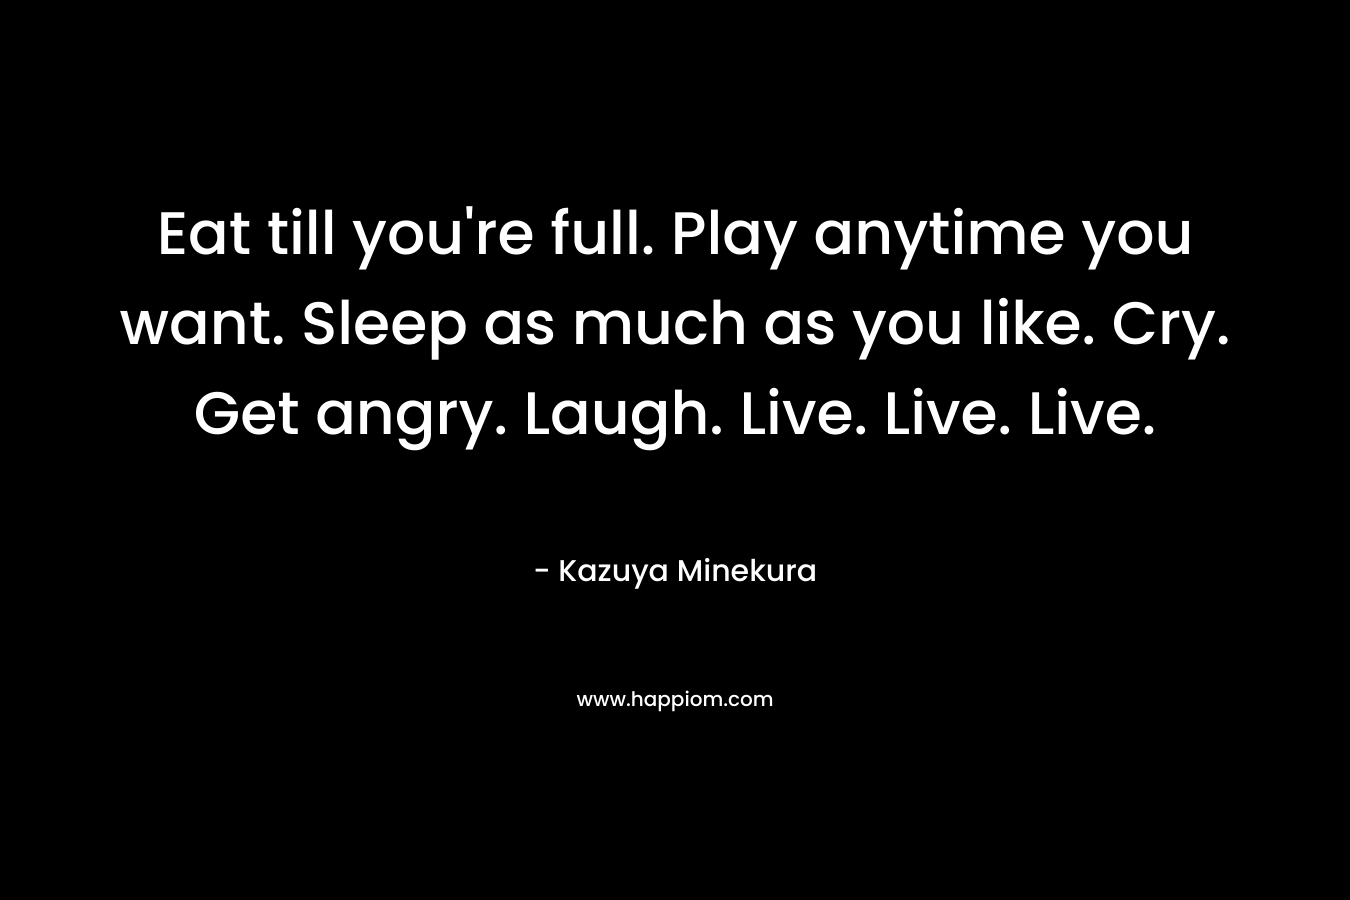 Eat till you're full. Play anytime you want. Sleep as much as you like. Cry. Get angry. Laugh. Live. Live. Live.